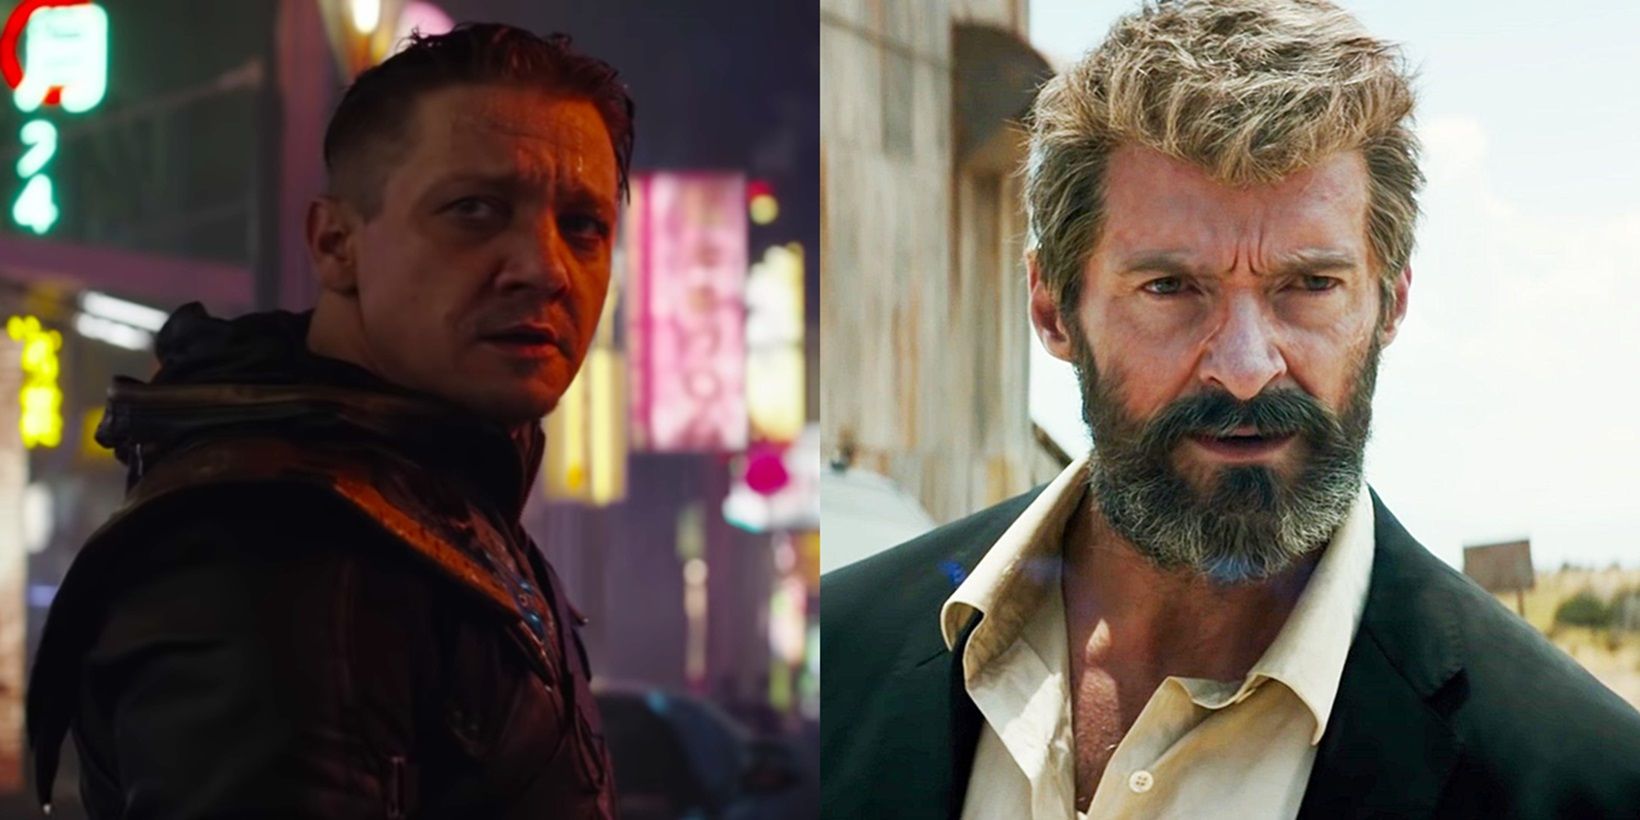 Jeremy Renner as Ronin in Avengers Endgame and Hugh Jackman as Wolverine in Logan